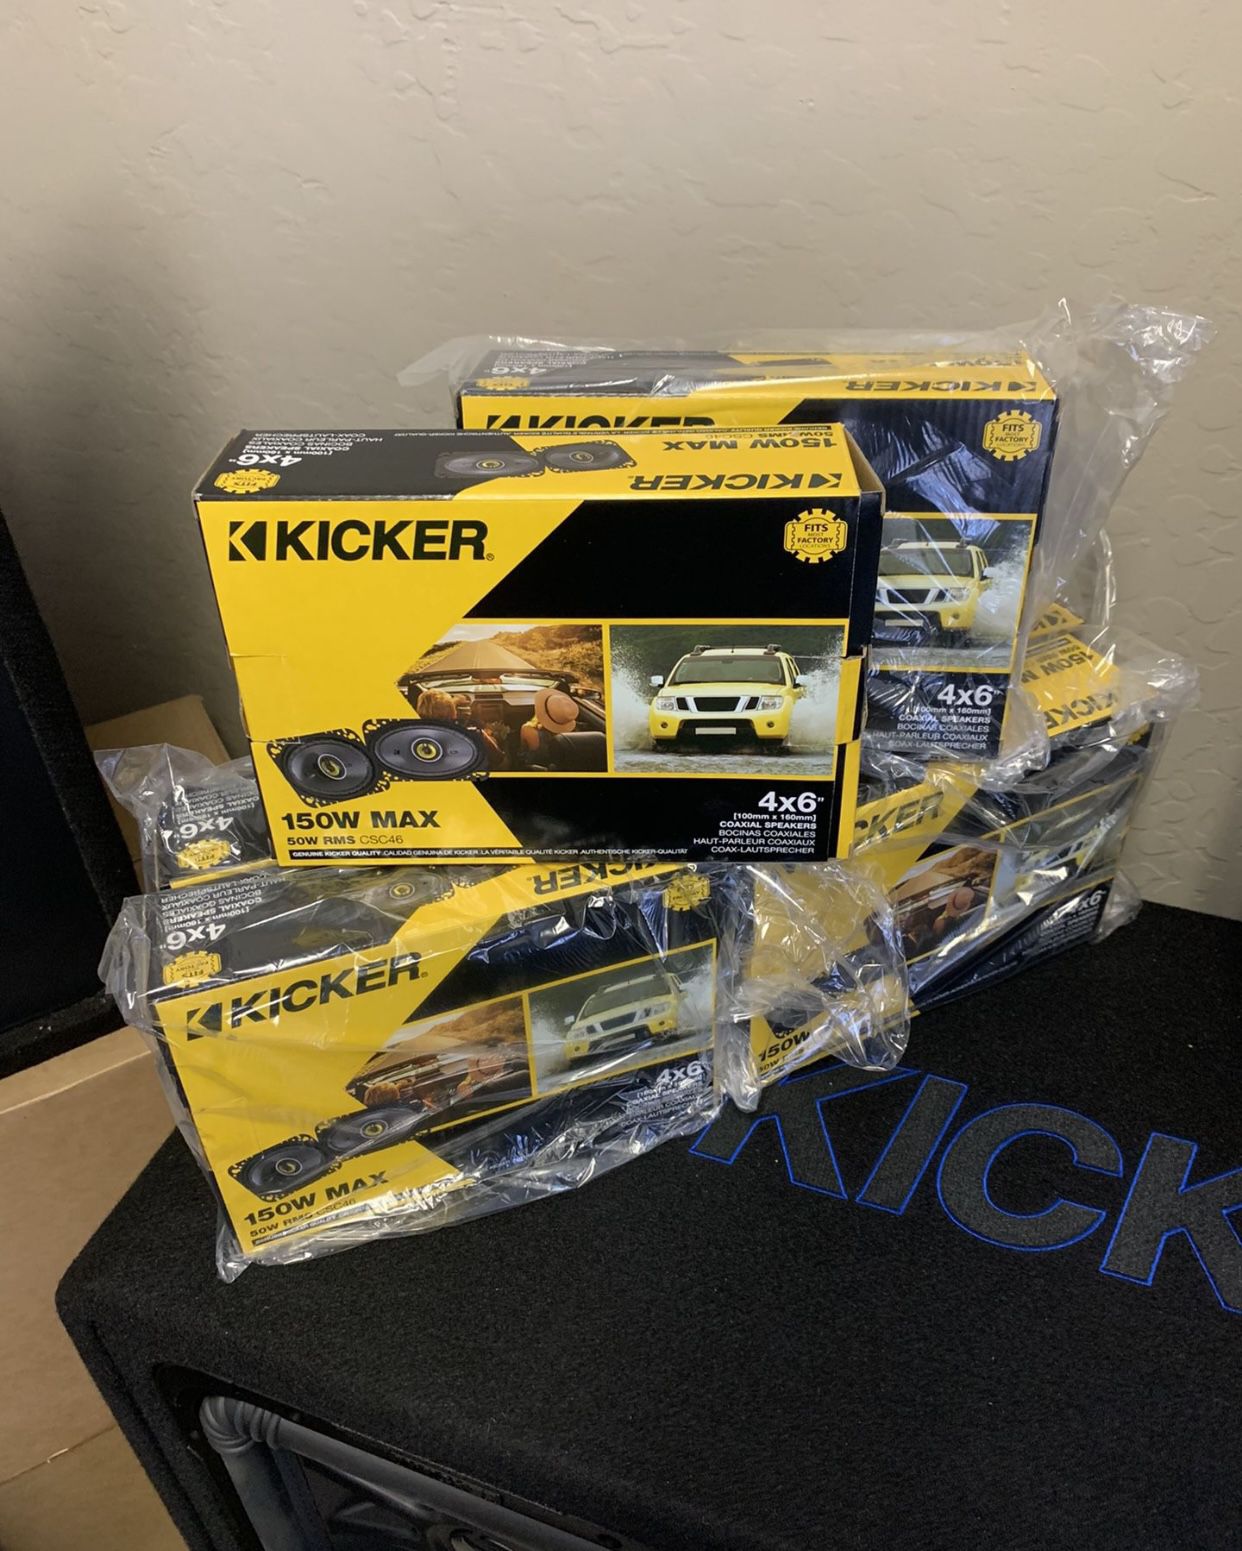 Kicker Car Audio. 4x6 Car Stereo Speakers . High Quality. Blowout $50 A Pair While They Last. New 